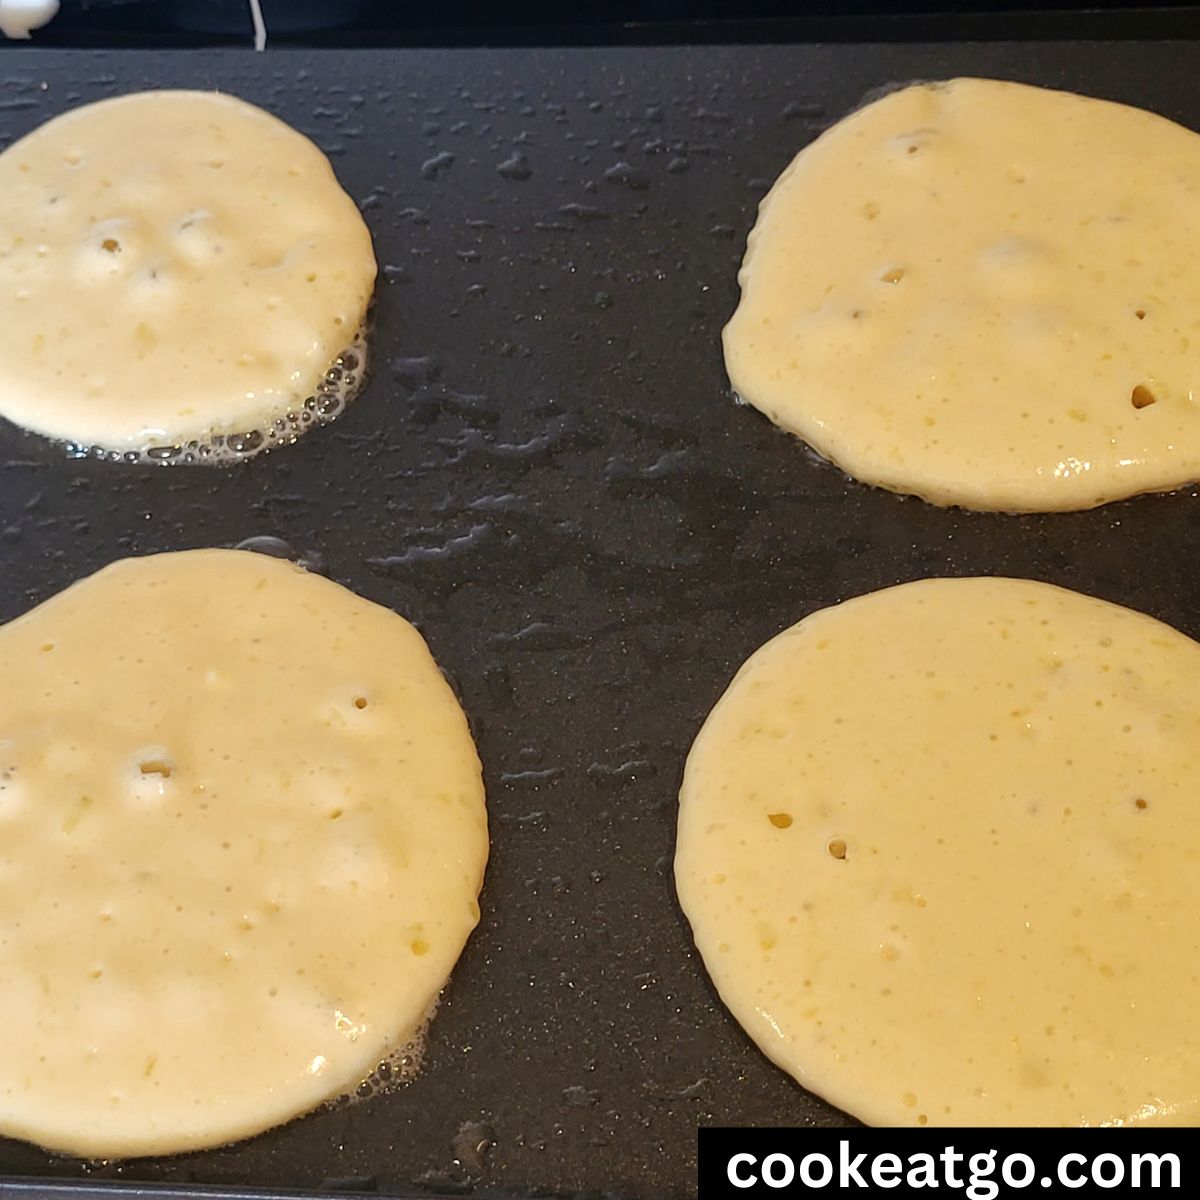 Homemade pancakes cooking on an electric griddle